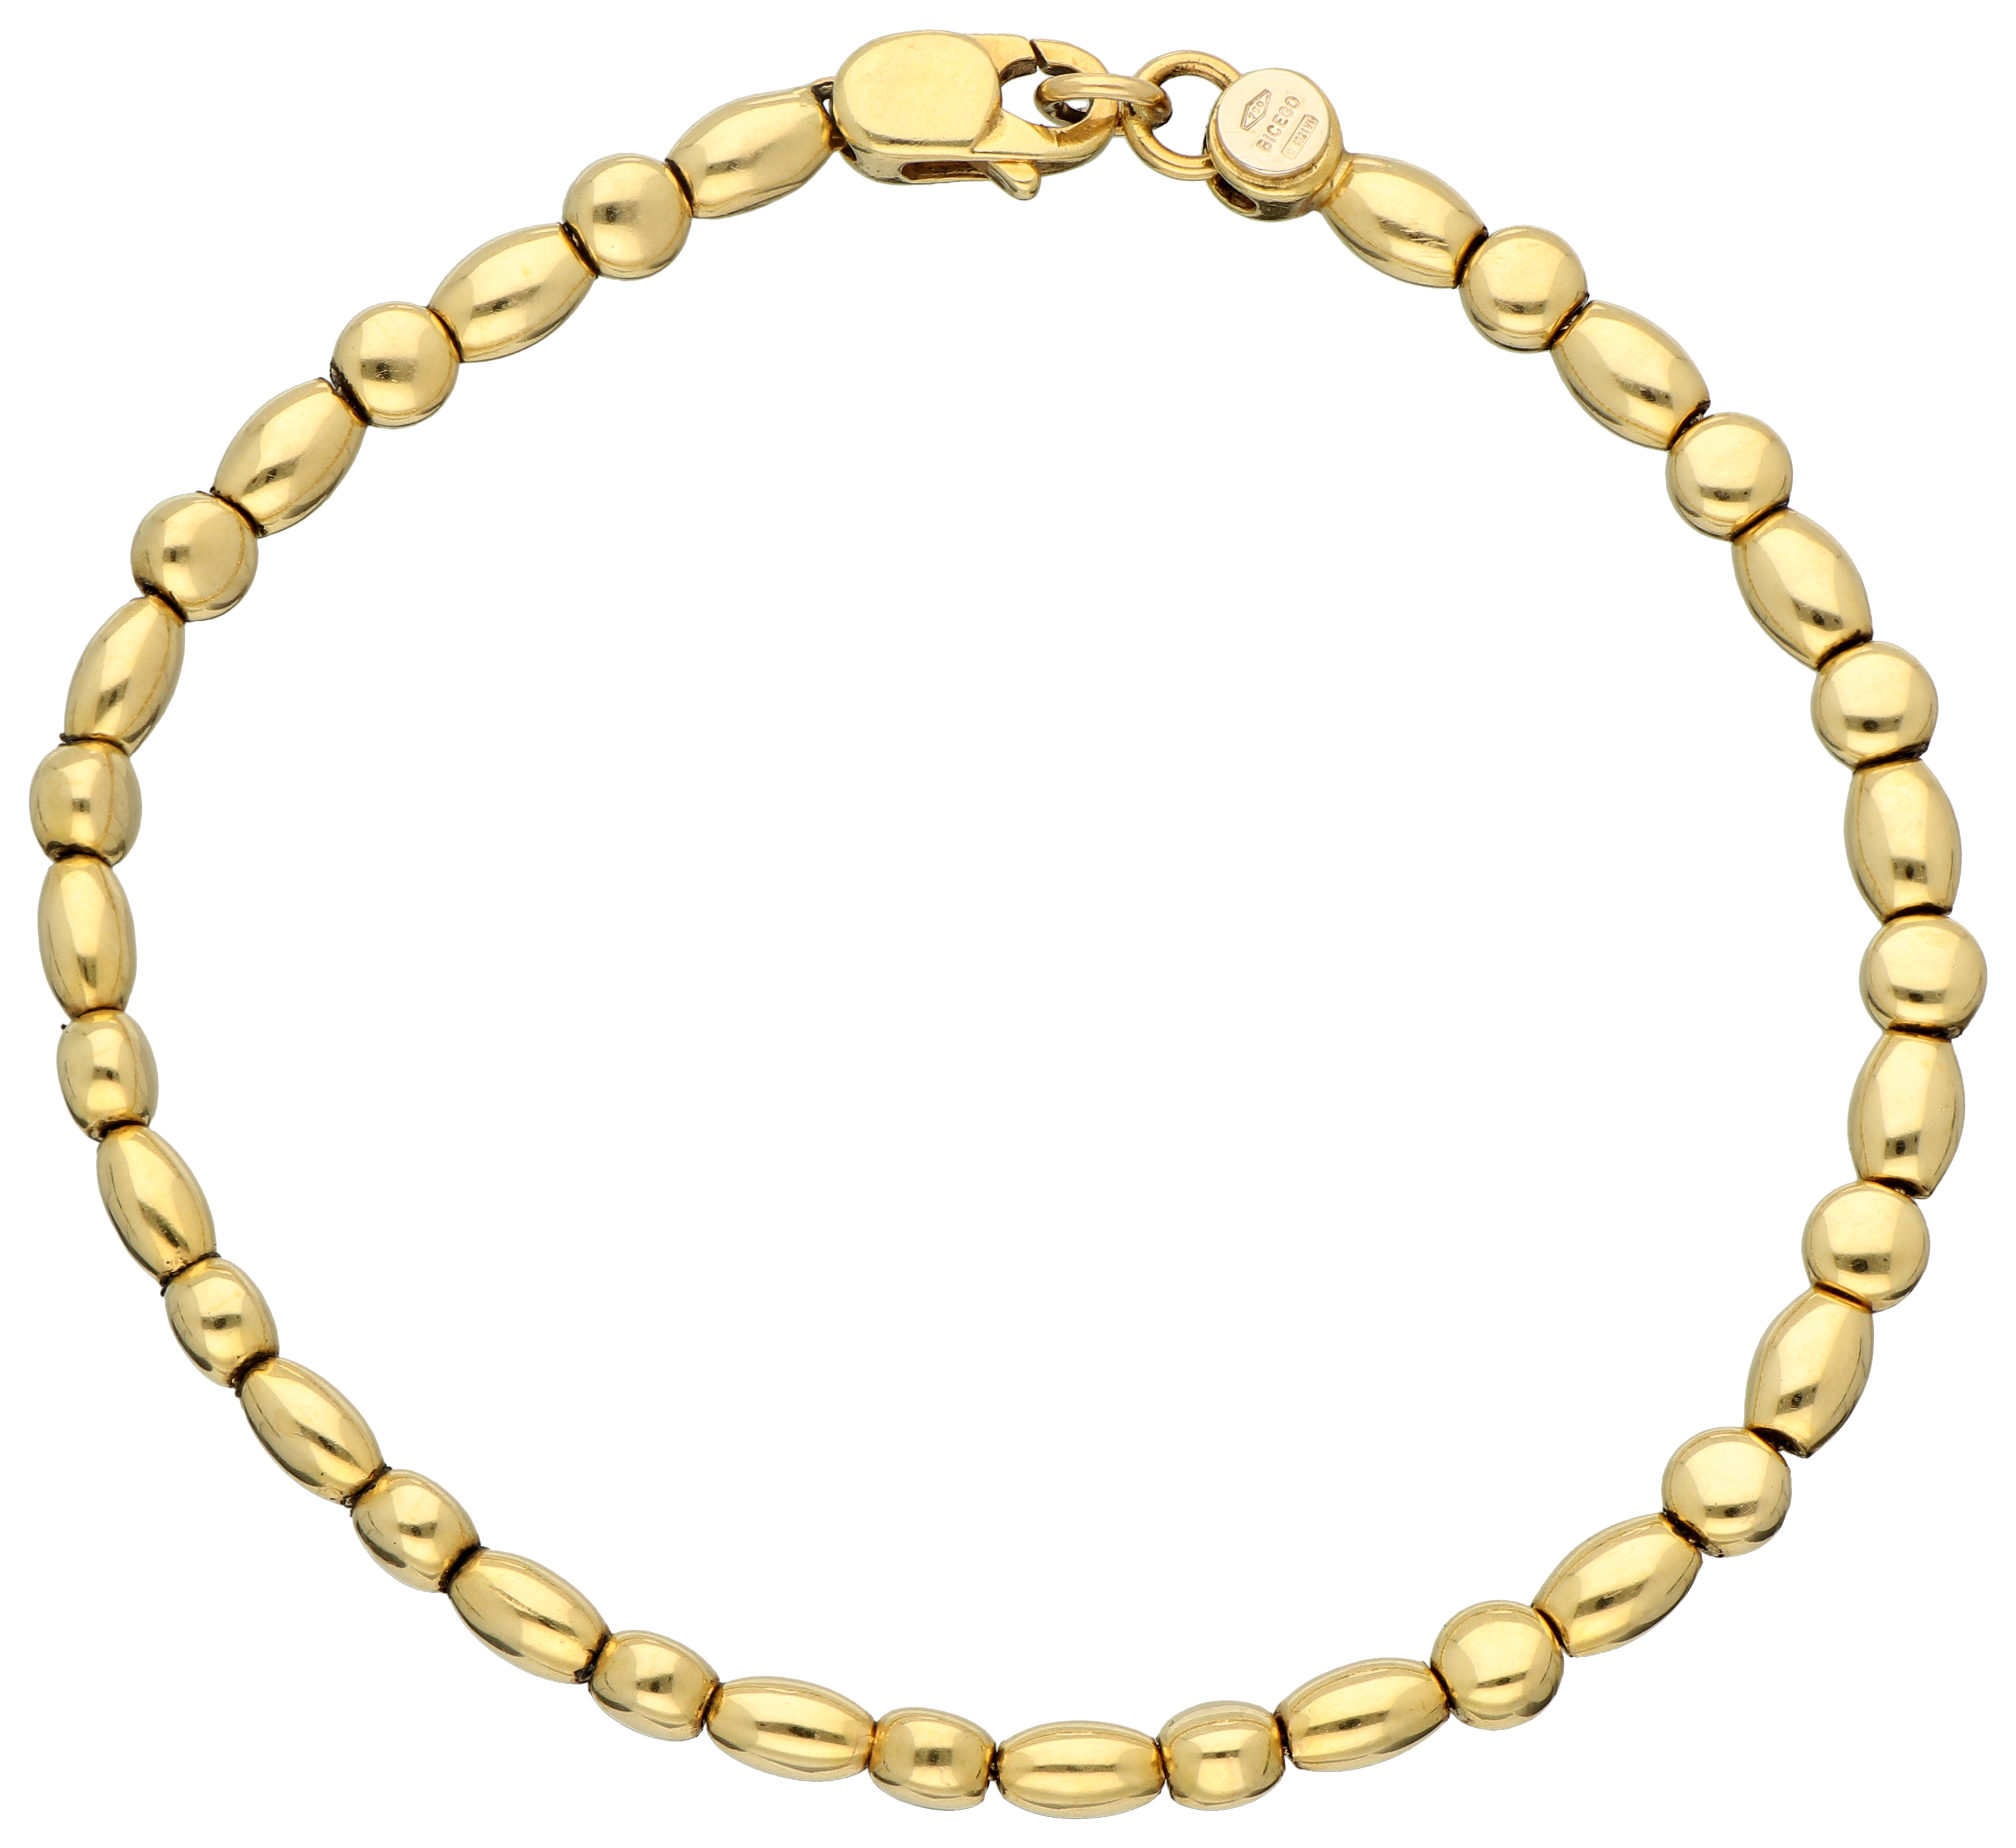 No Reserve - Marco Bicego 18K yellow gold bracelet. - Image 2 of 5